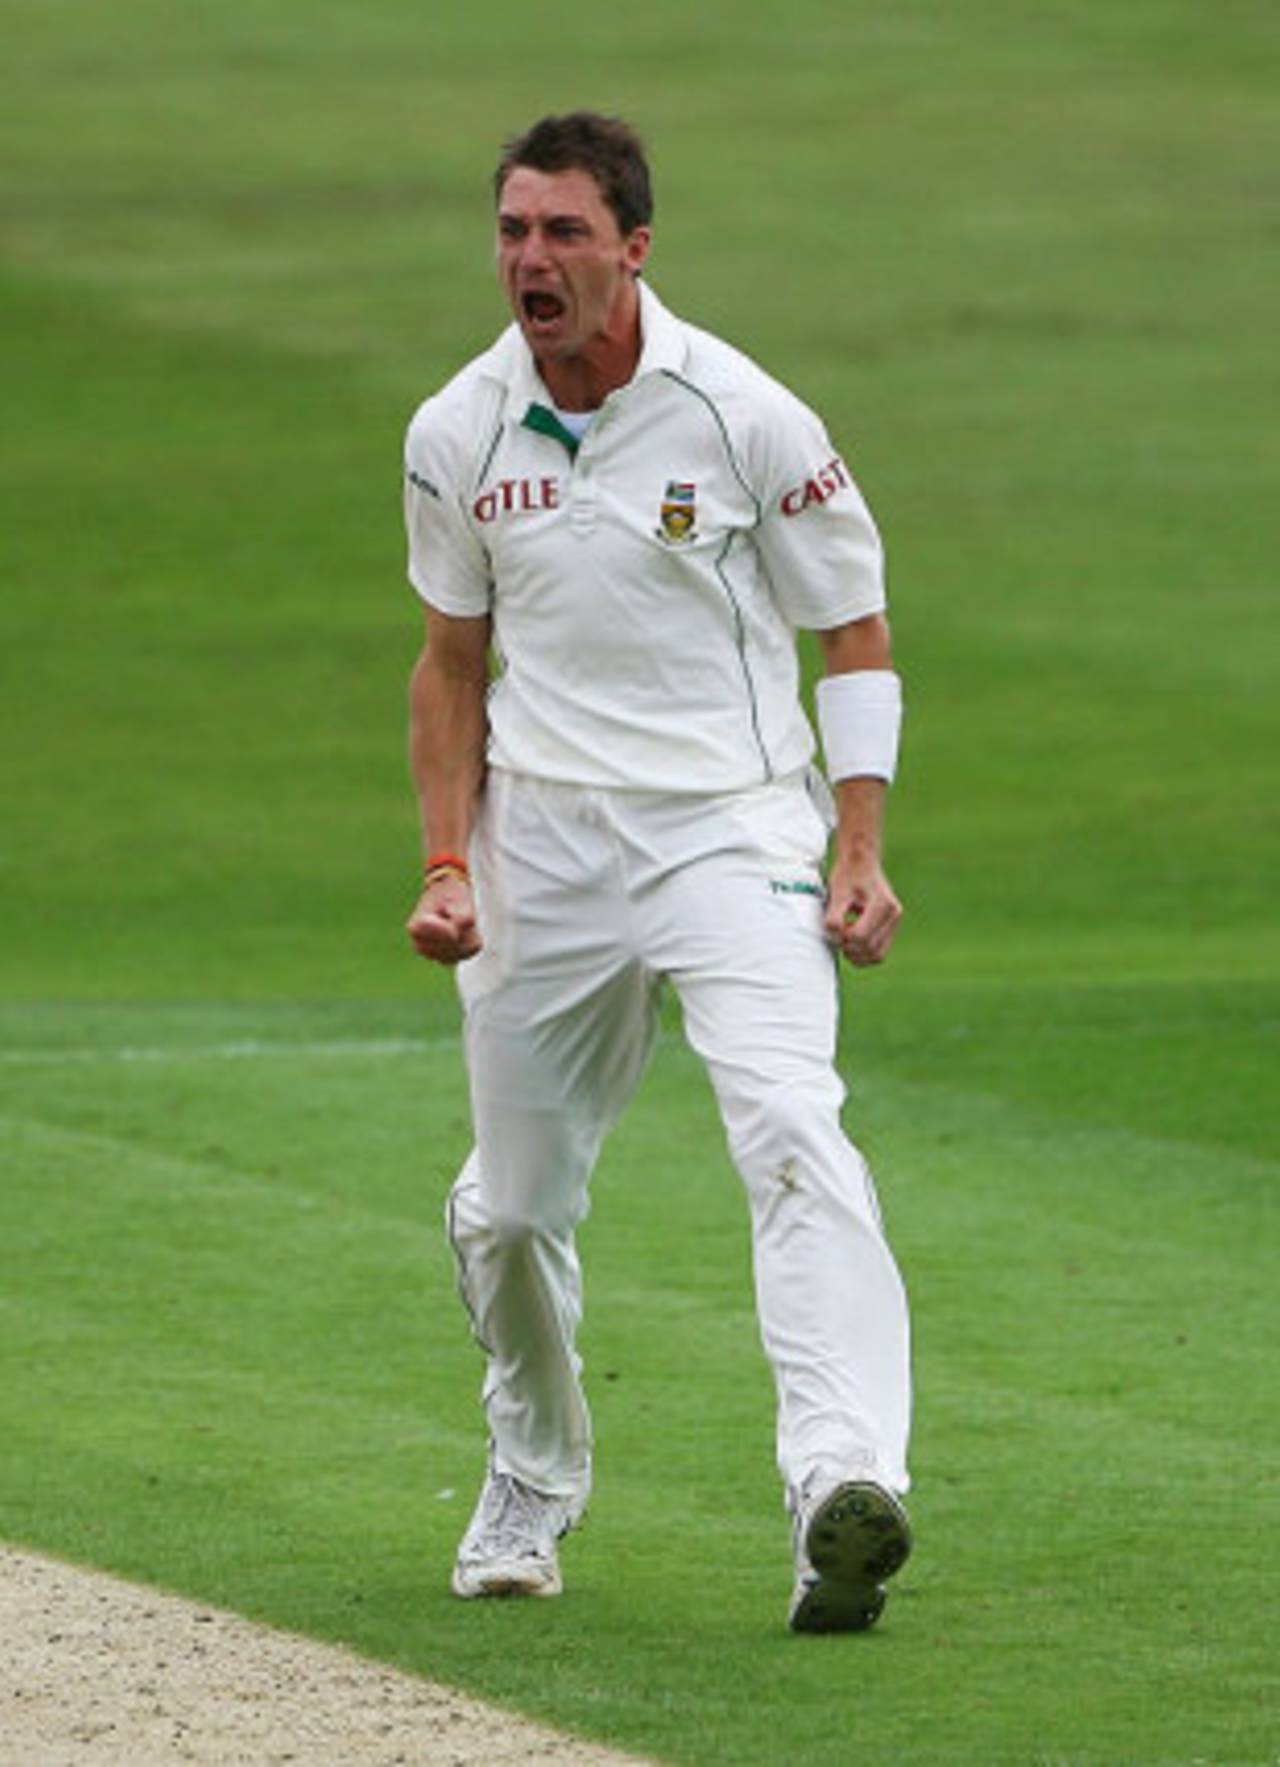 A pumped-up Dale Steyn roars in triumph as Kevin Pietersen falls, England v South Africa, 2nd Test, Headingley, July 18, 2008